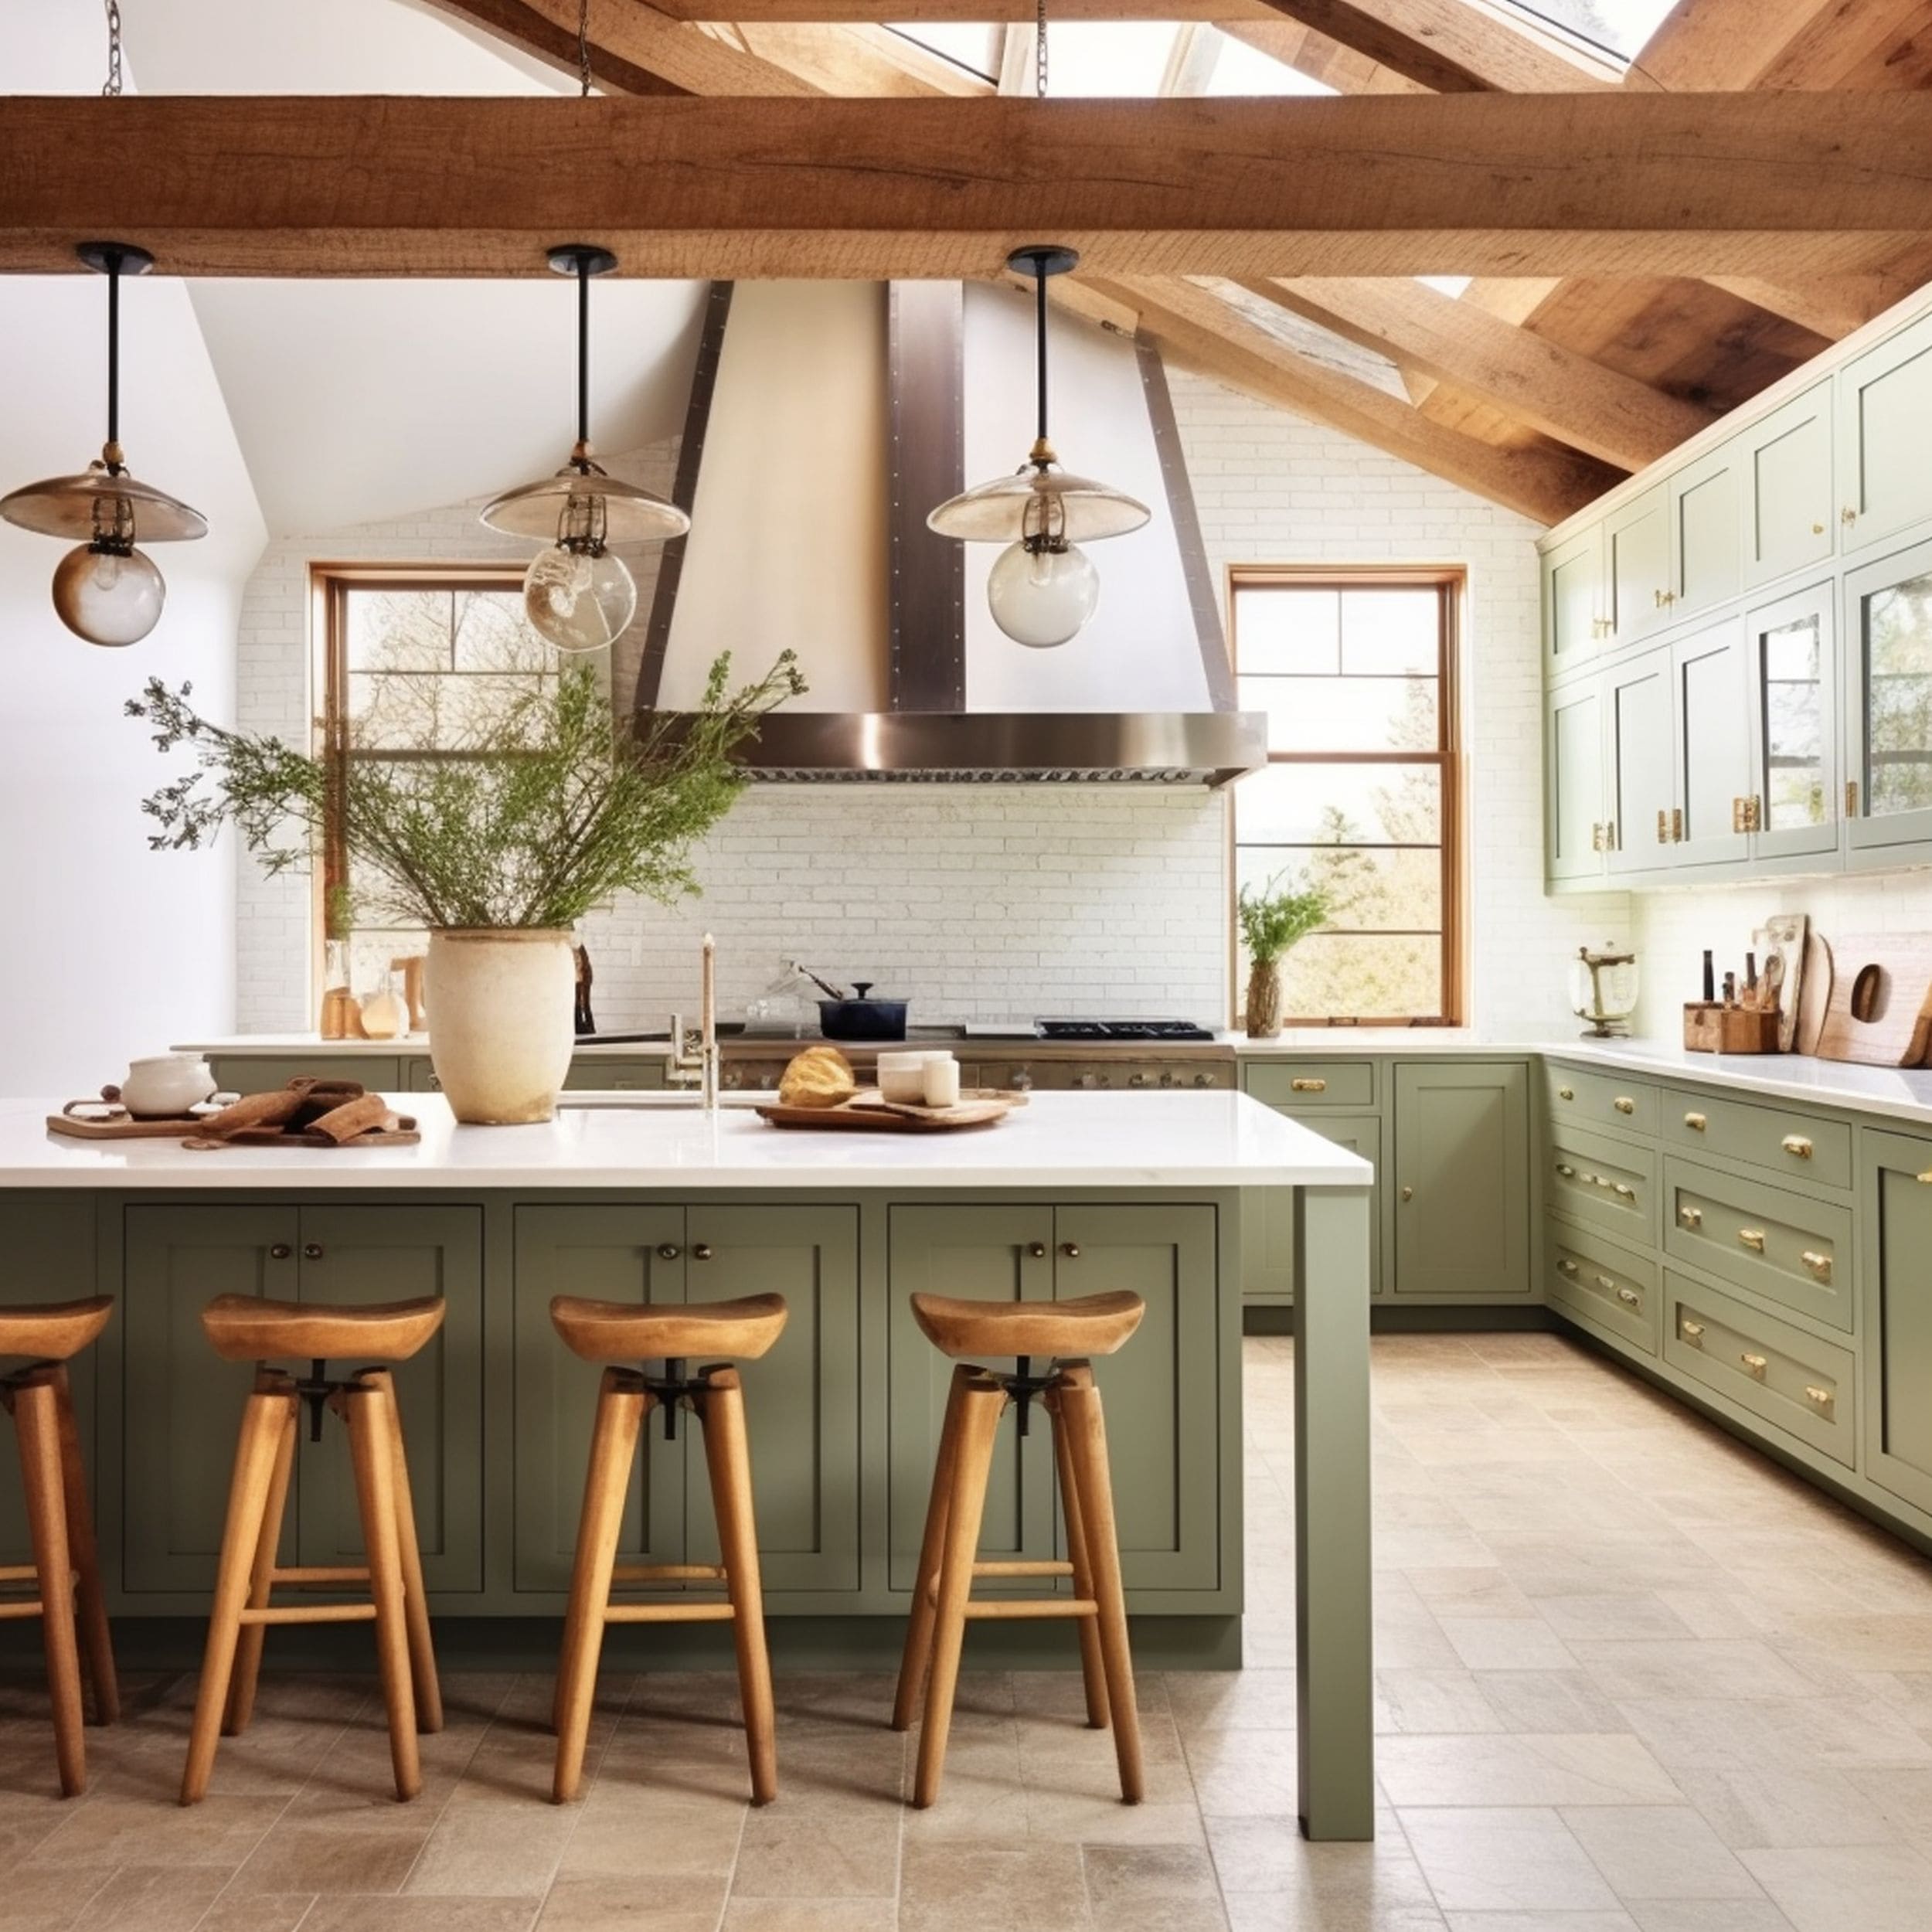 Kitchen With Sage Green Cabinets and Rustic Ceiling Beams